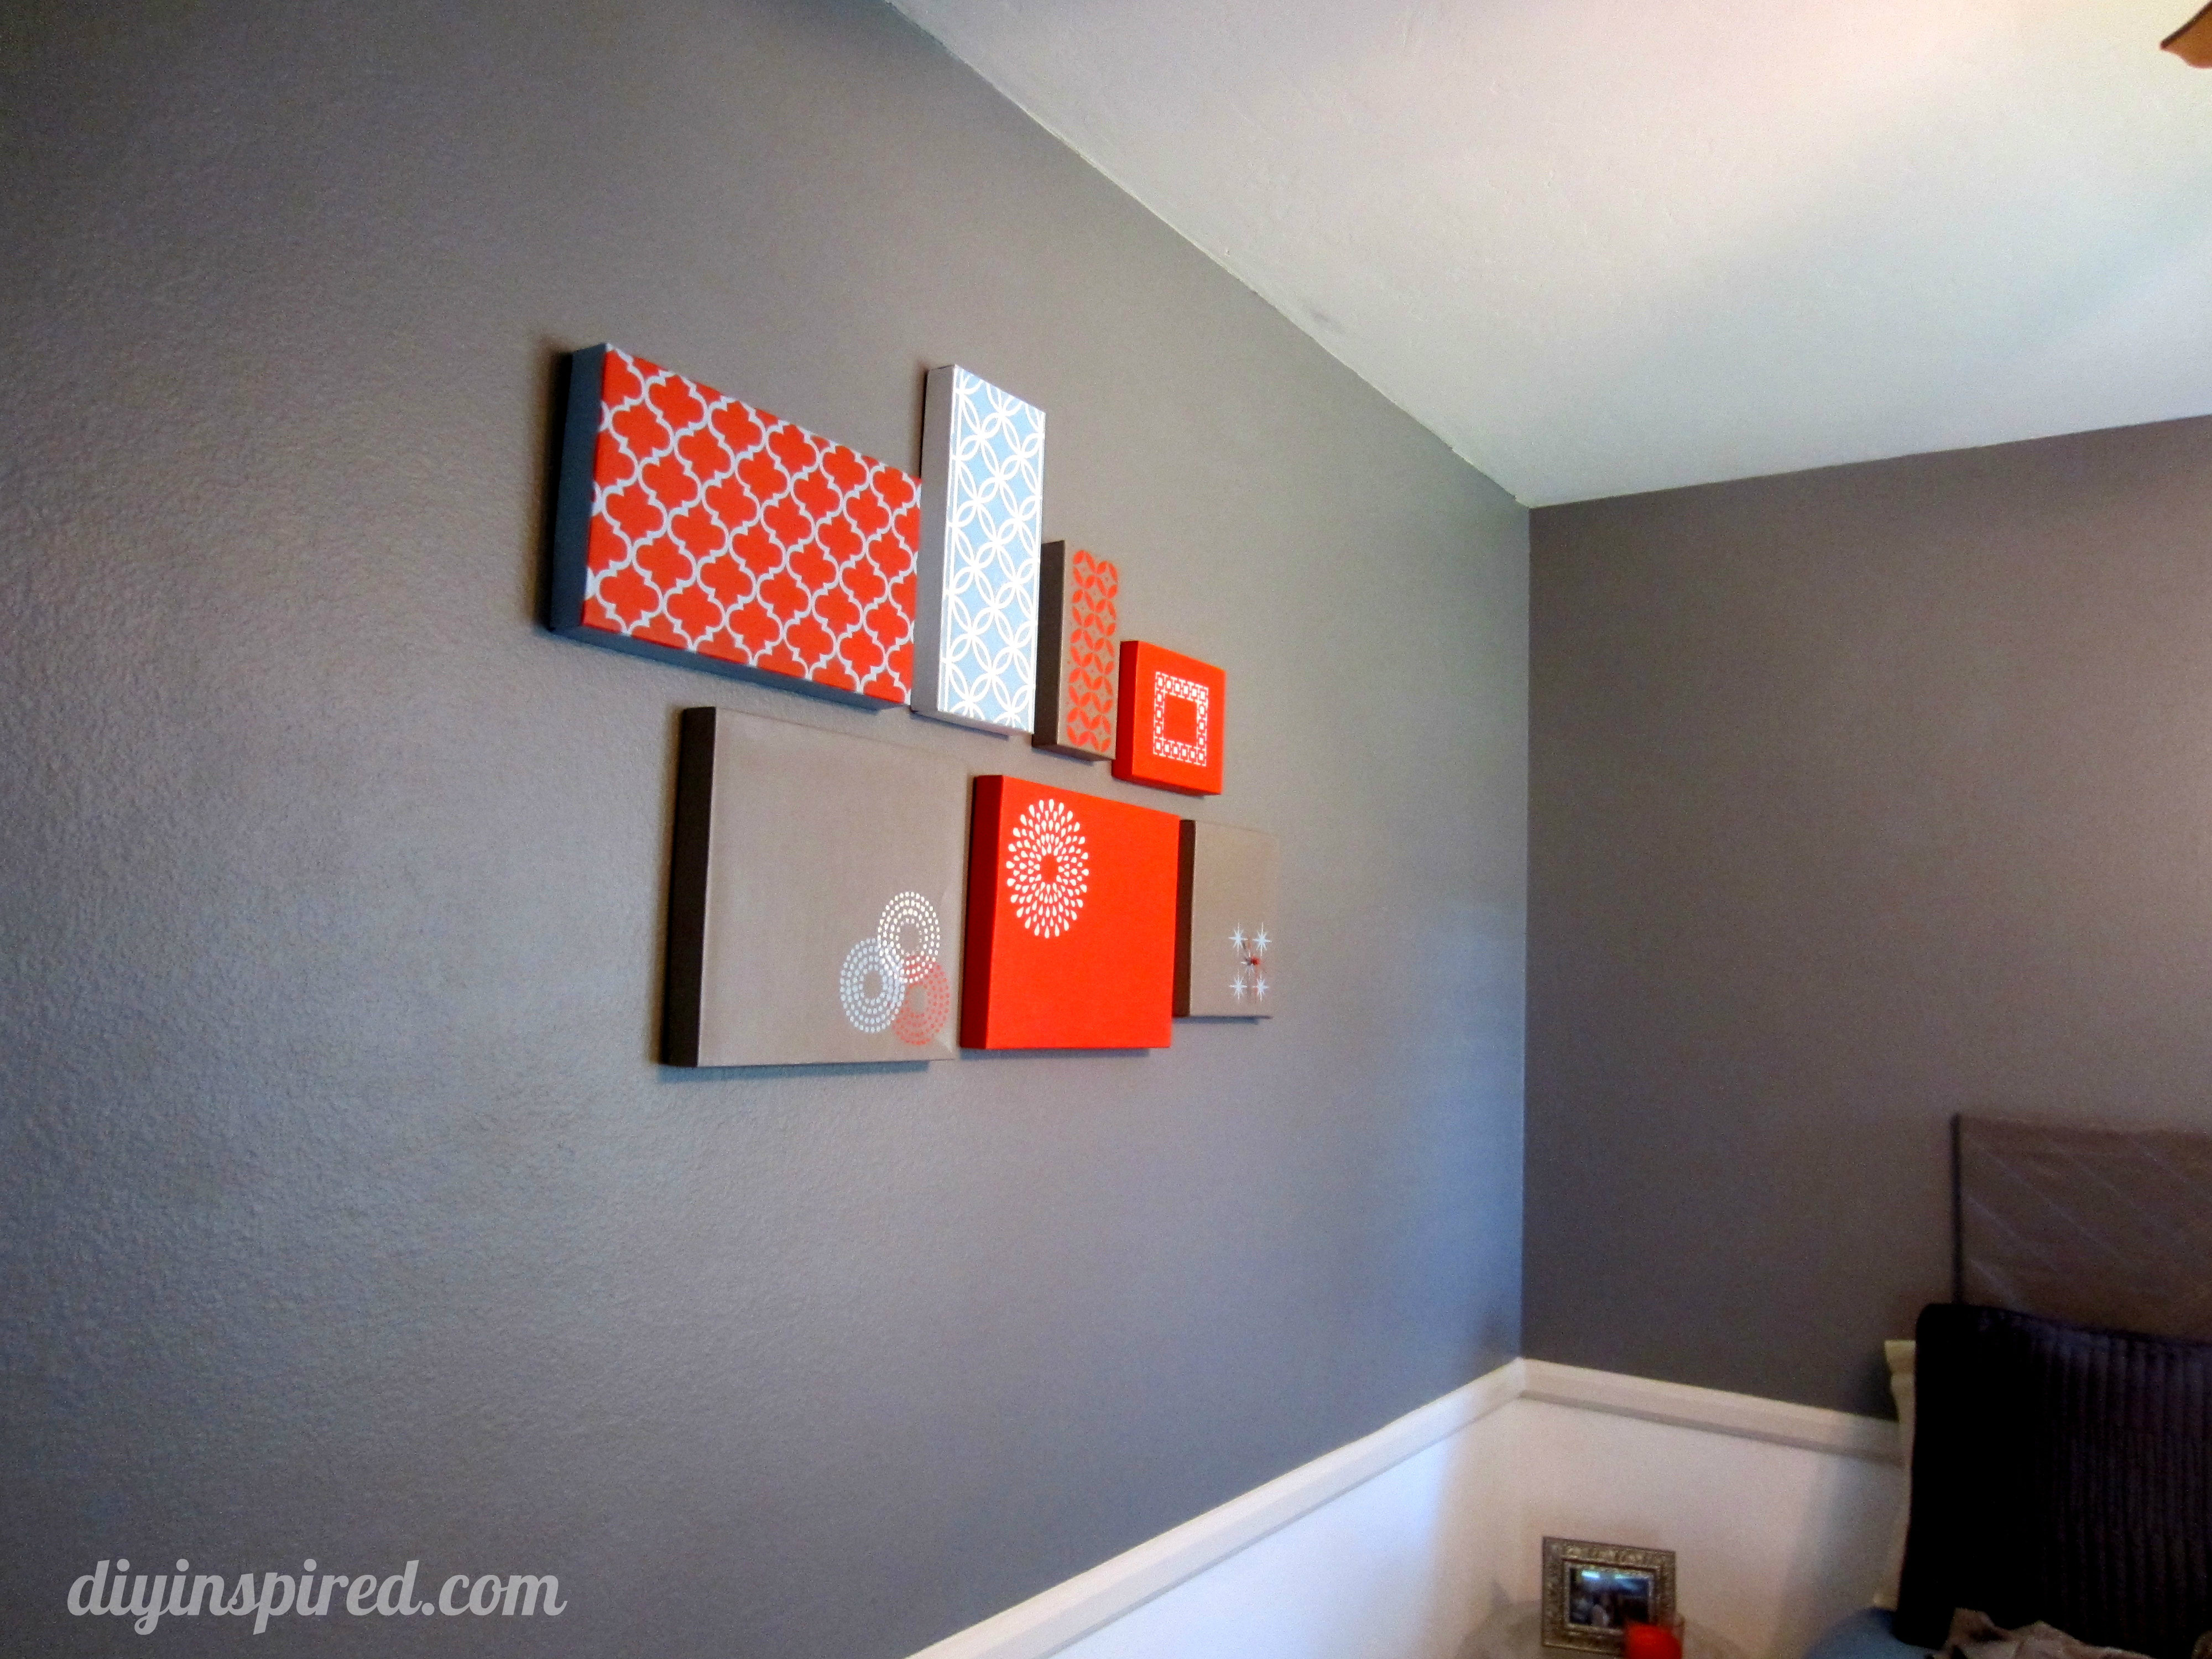 shoe boxes on wall